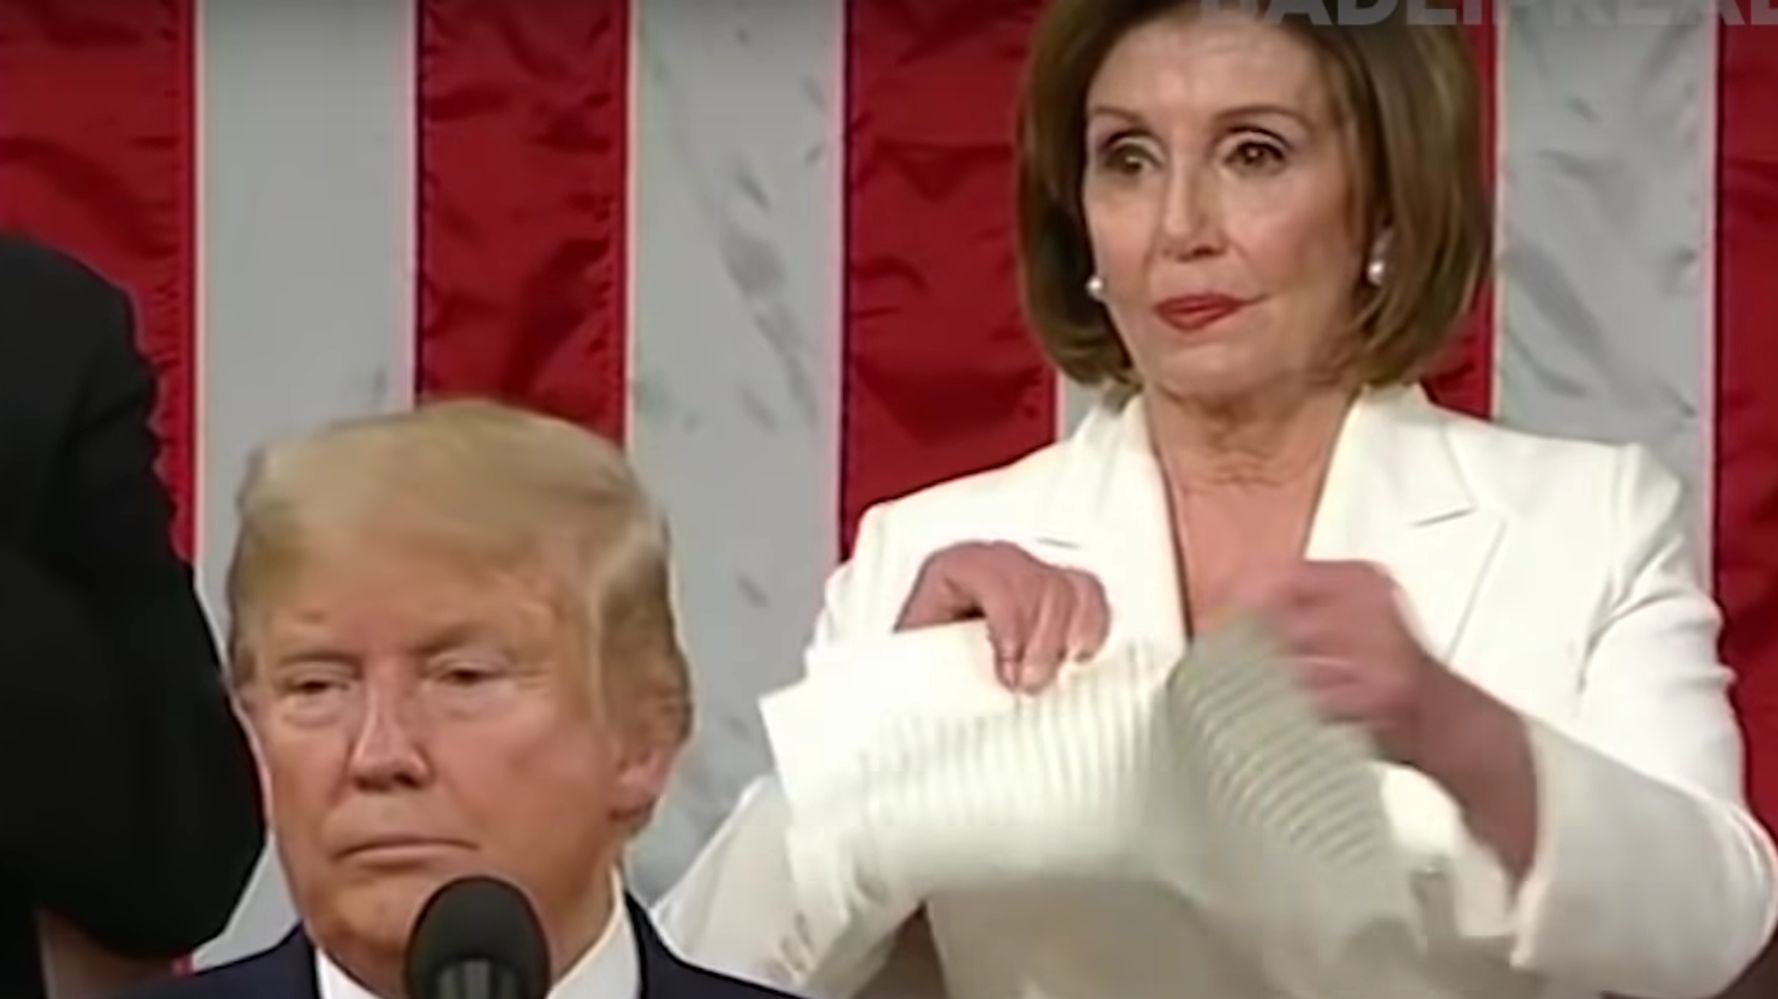 Donald Trump’s State Of The Union Finally Gets The Bad Lip Reading It